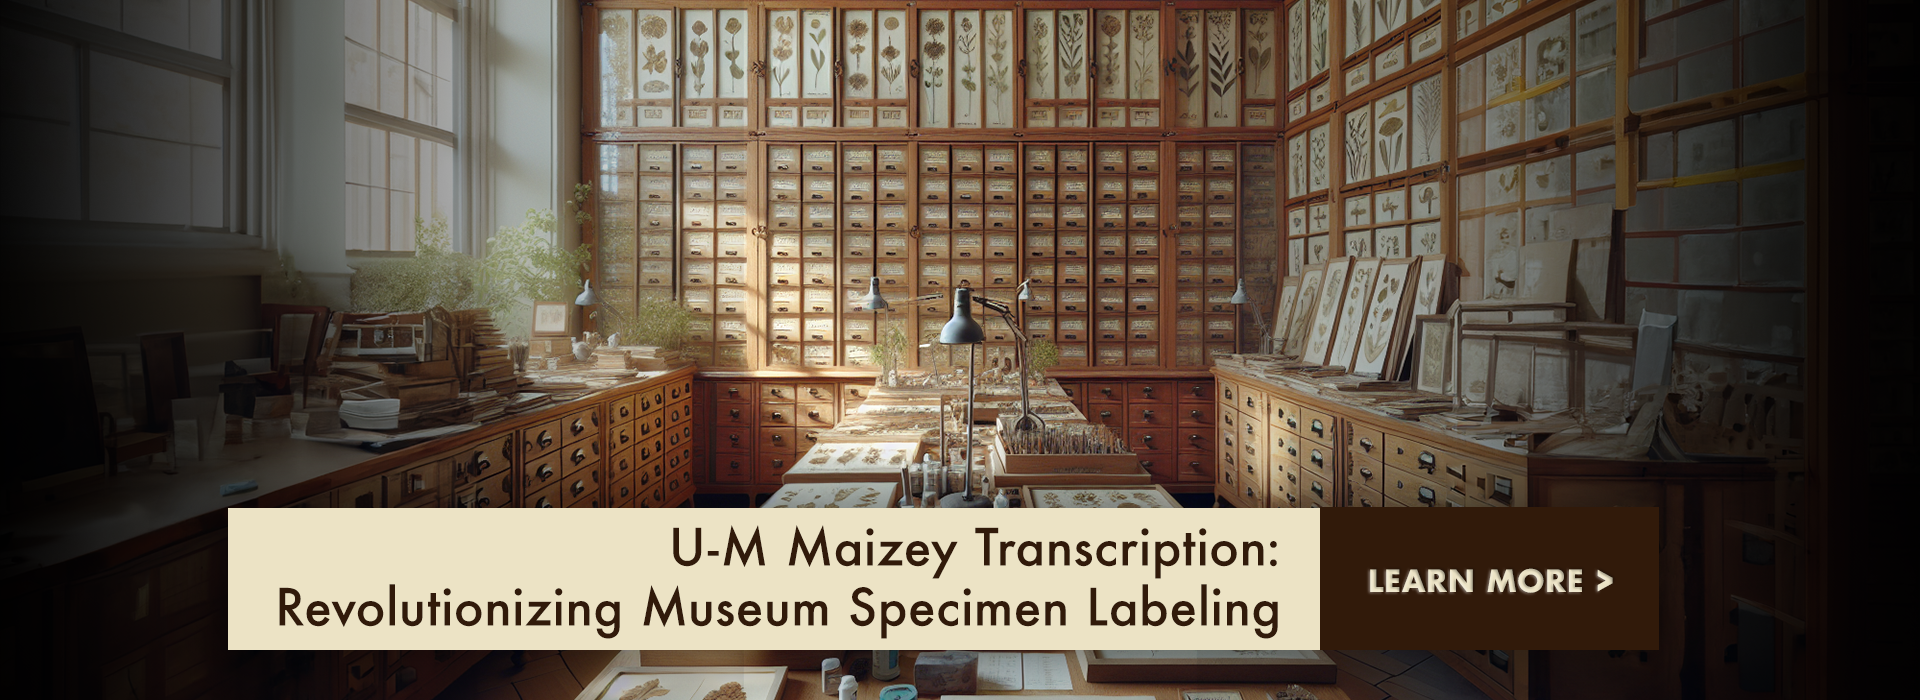 The image showcases a beautifully organized and well-lit museum specimen room, filled with drawers and cabinets holding various botanical specimens. 